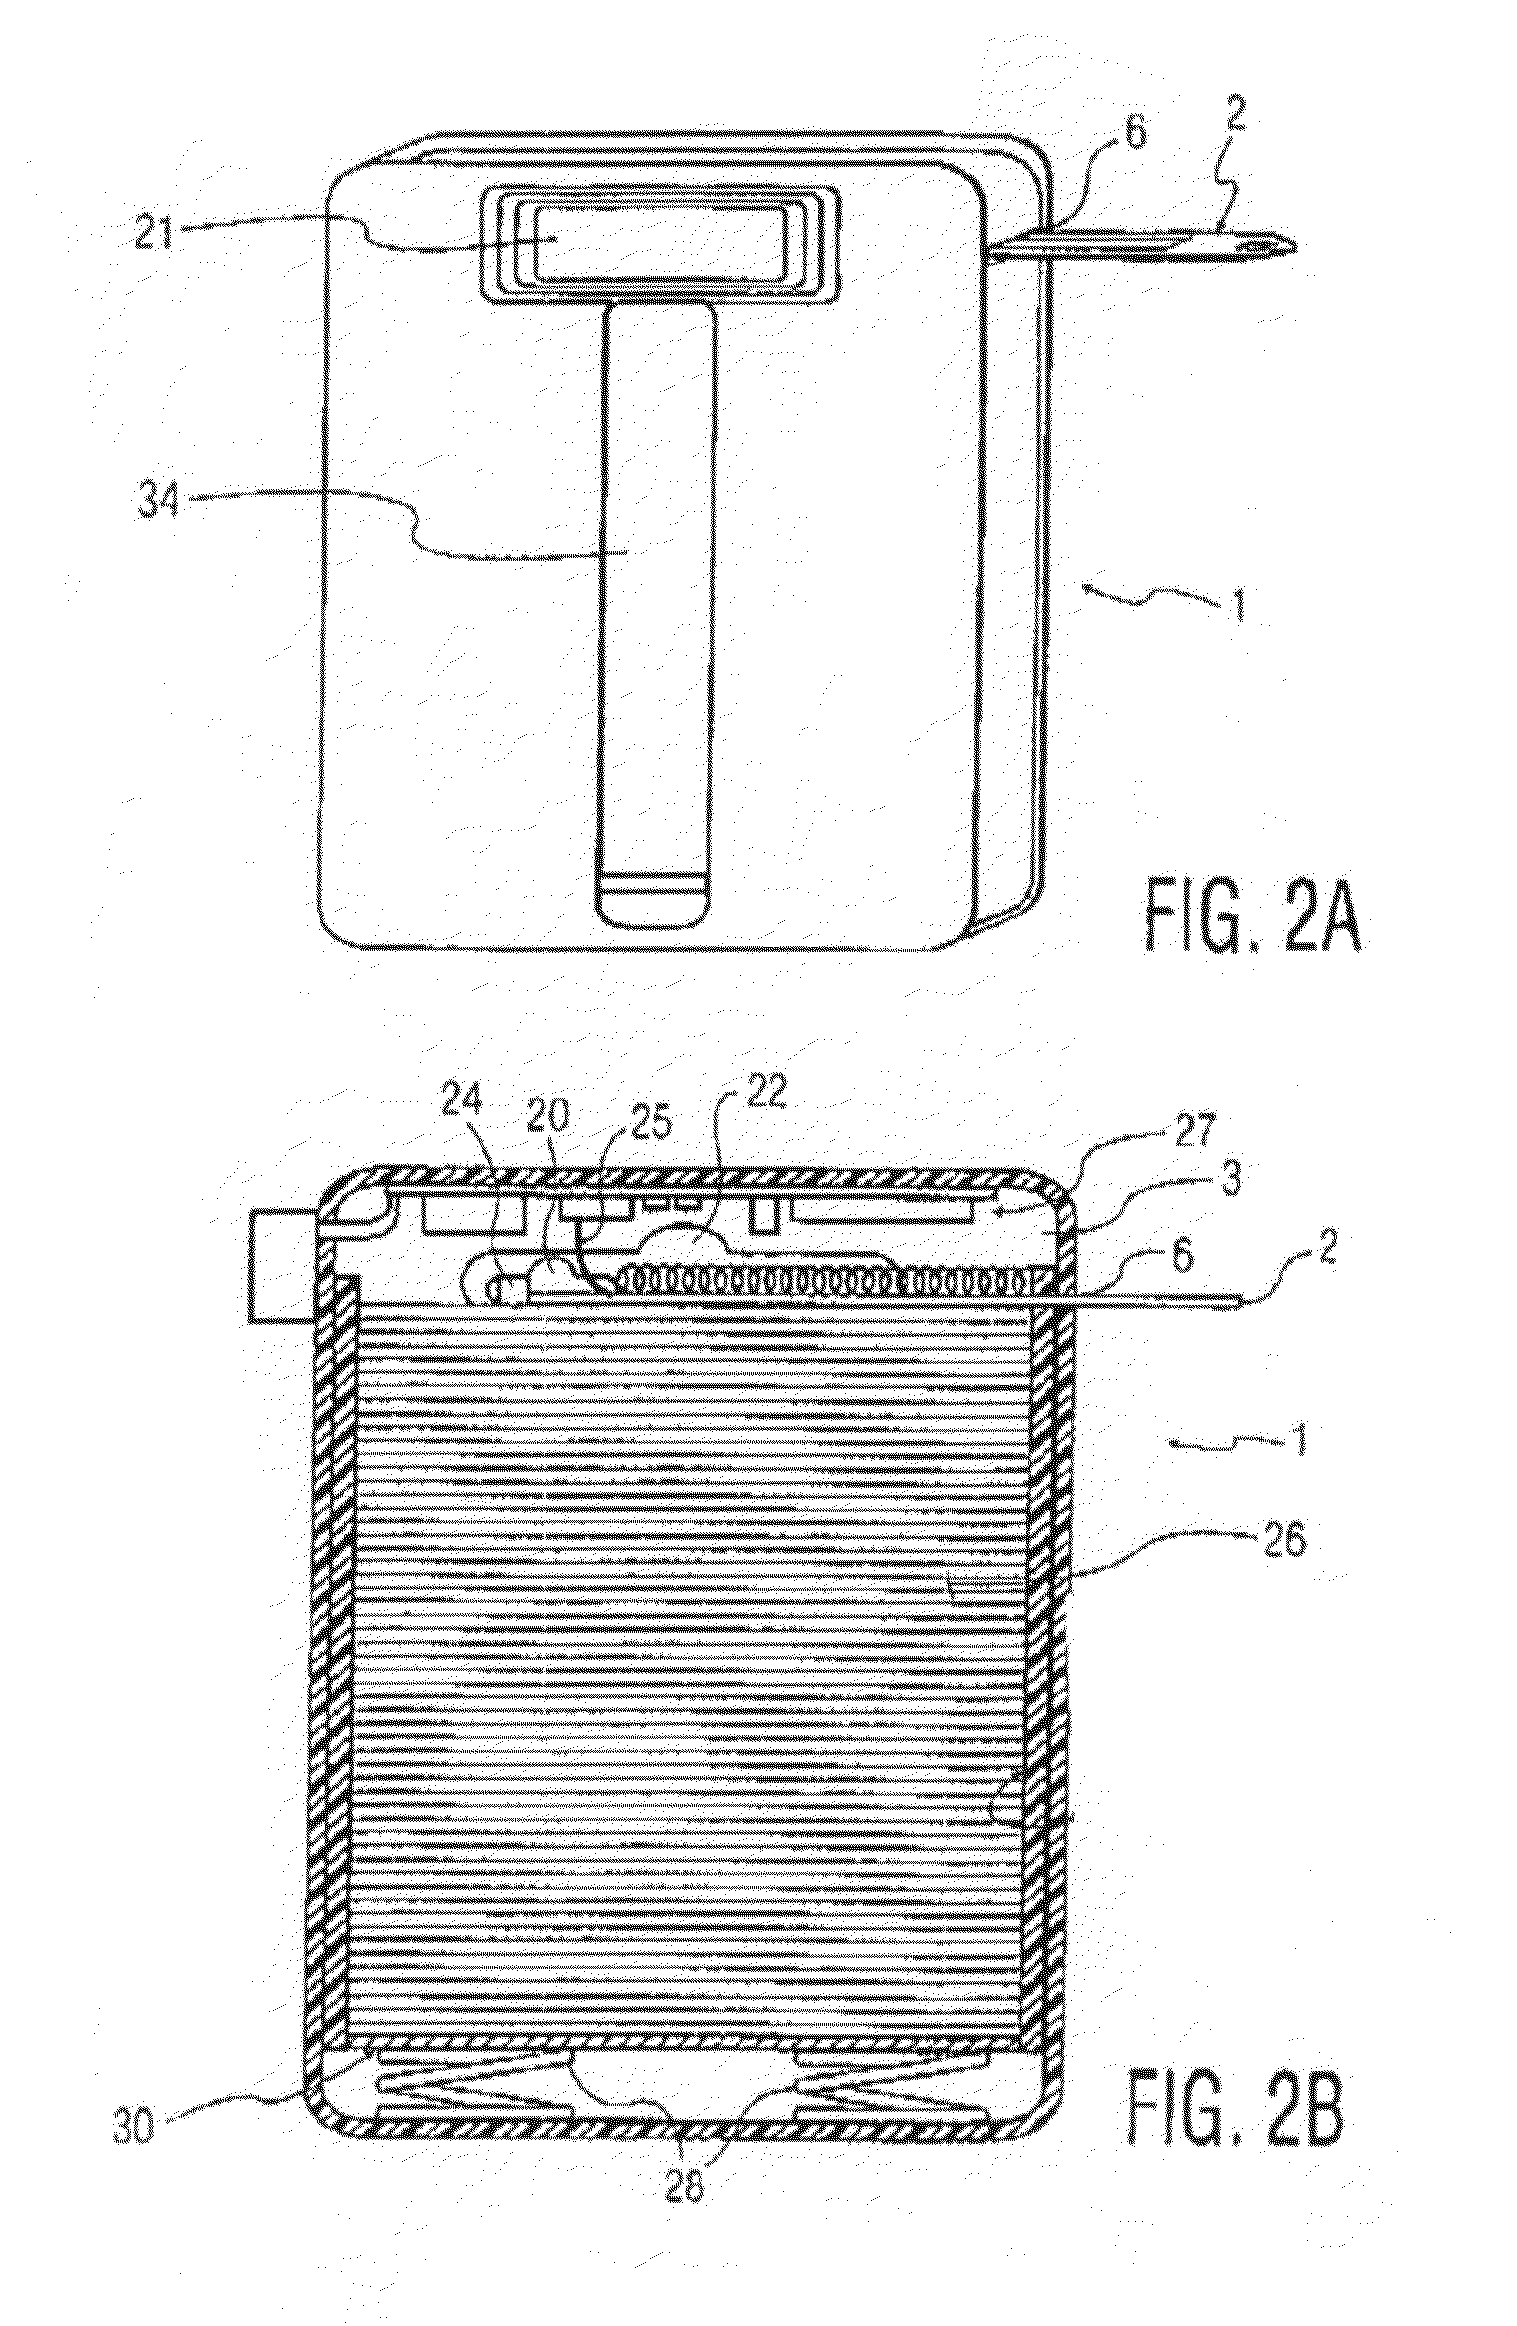 Disposable, refillable glucometer with cell phone interface for transmission of results